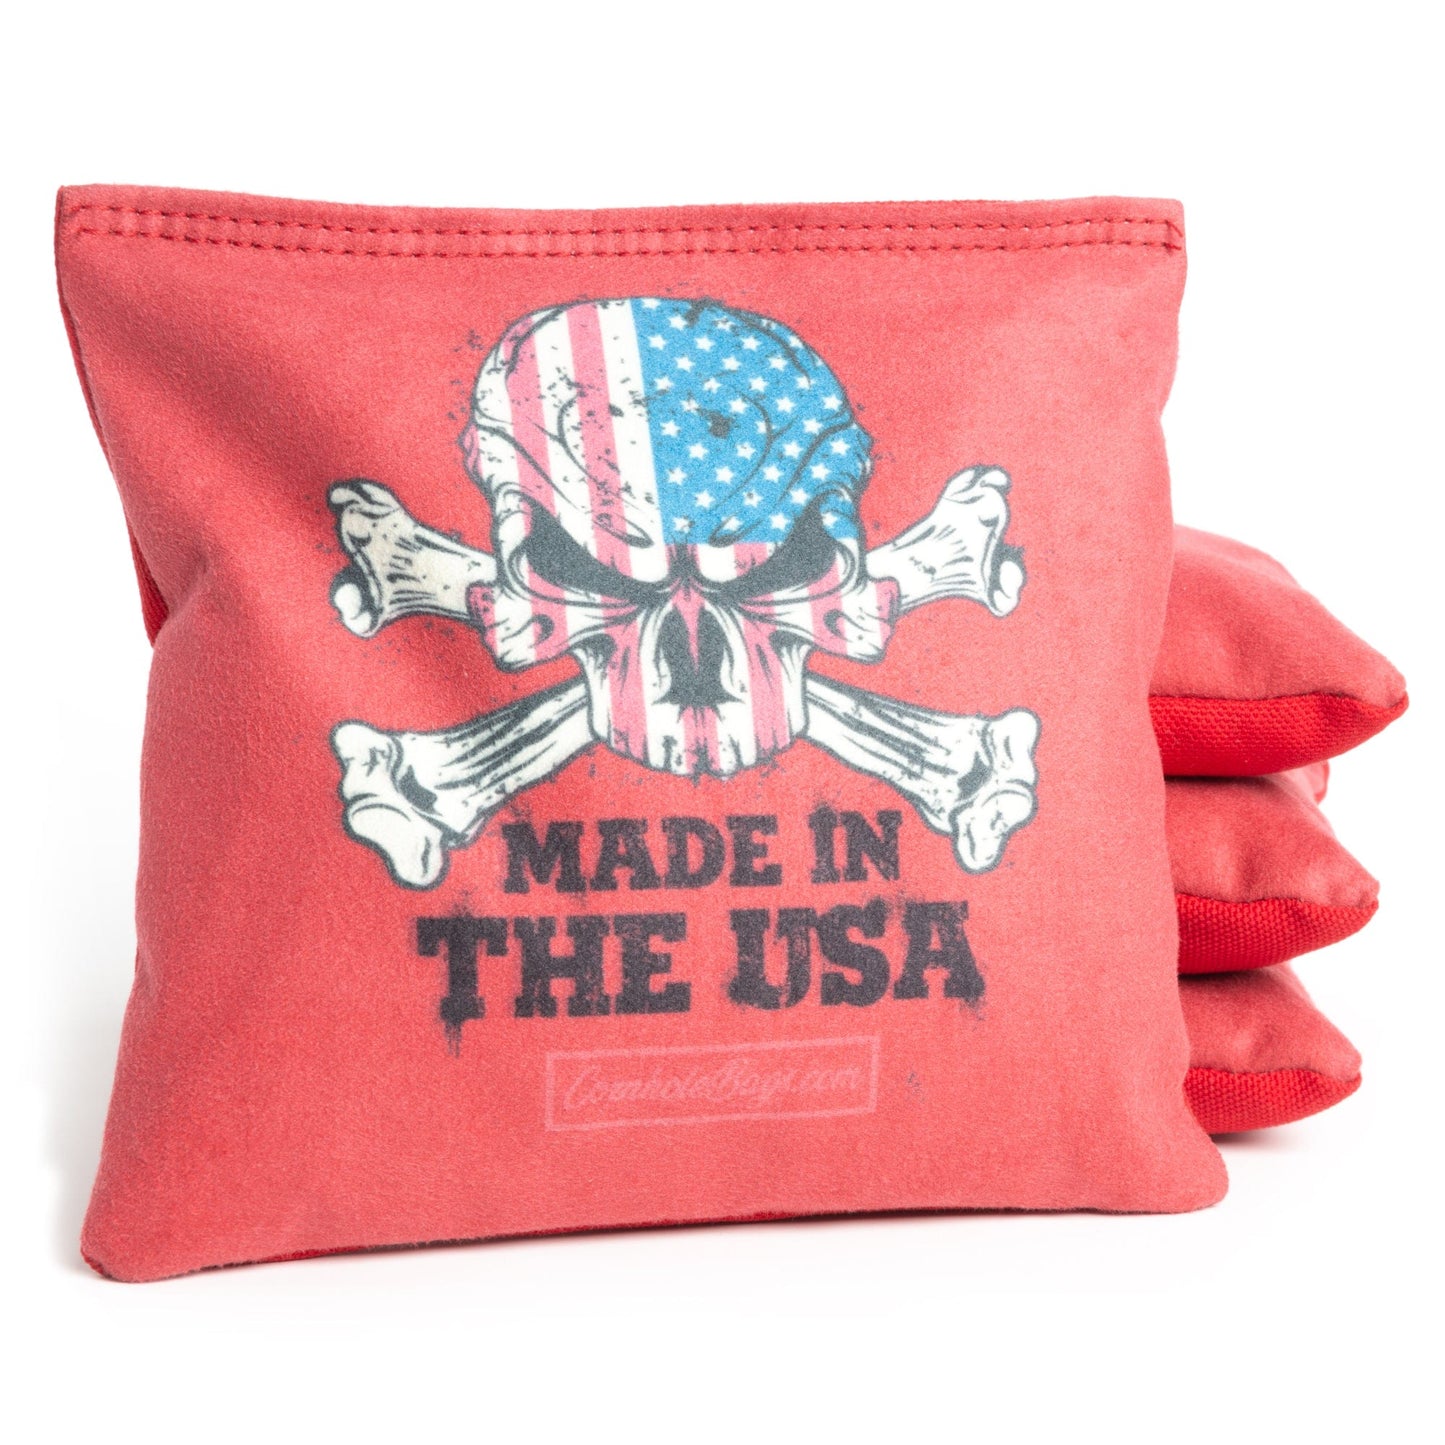 Made In The USA Glide & Grip Cornhole Bags